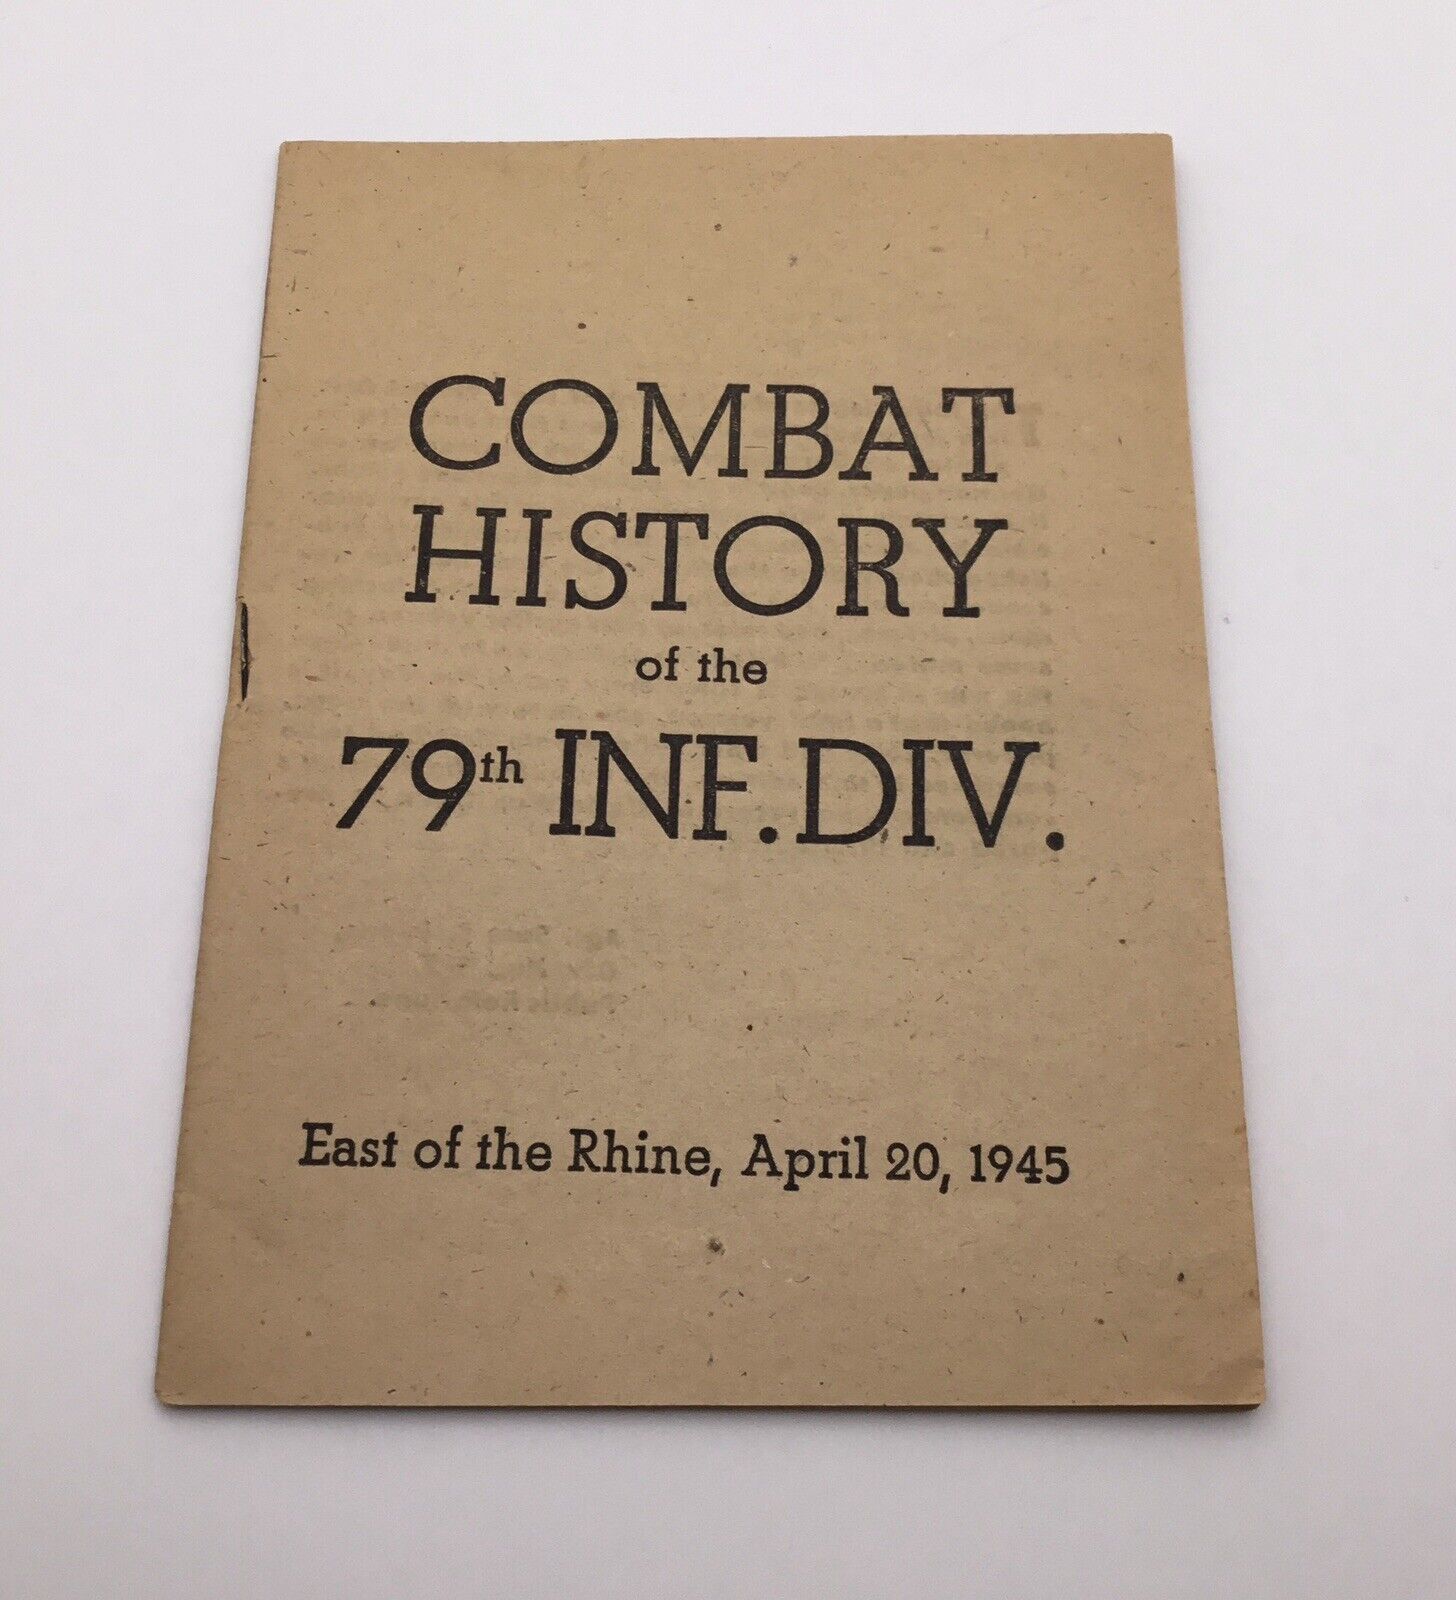 Combat History of the 79th Infantry Division Booklet